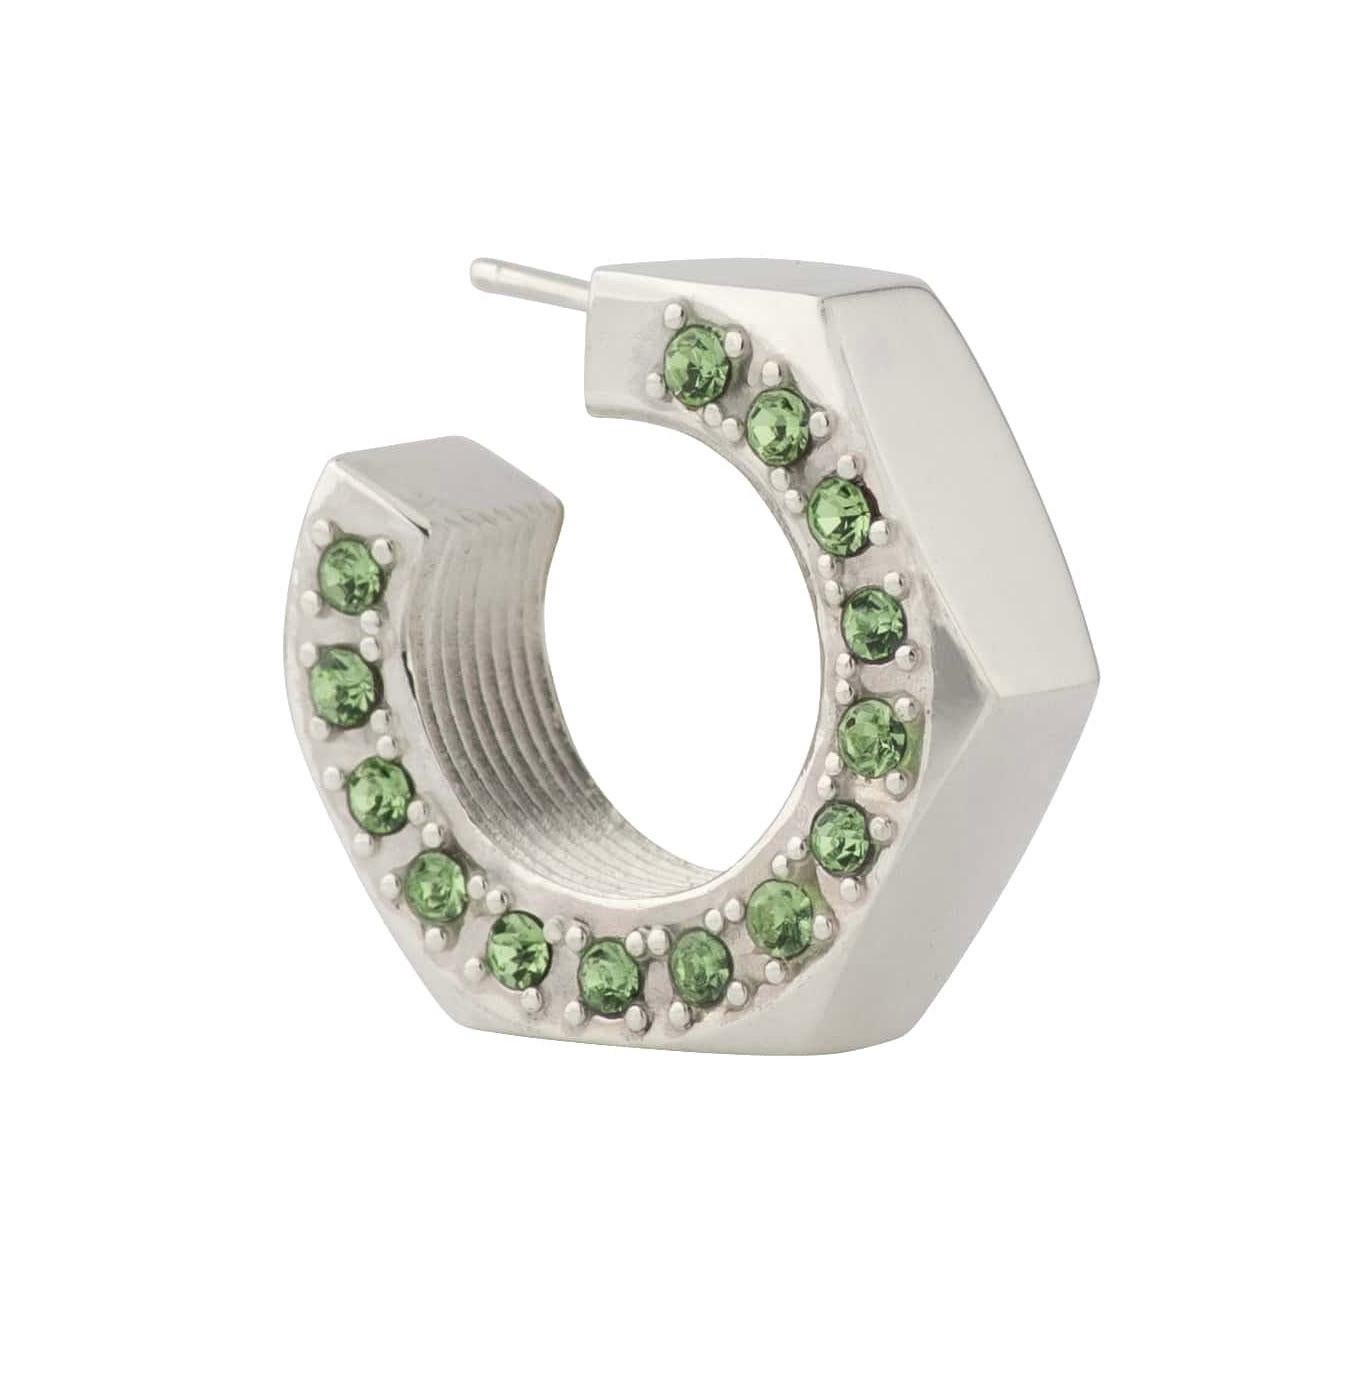 Hex nut shaped silver earrings with 2.75 mm peridot stones on one side of each earring.
.
Sold as a pair
For pierced ears
One size only
Type of closure: Traditional closure
Material: 925 Sterling Silver
Finishing: Gold plated (some of the images are